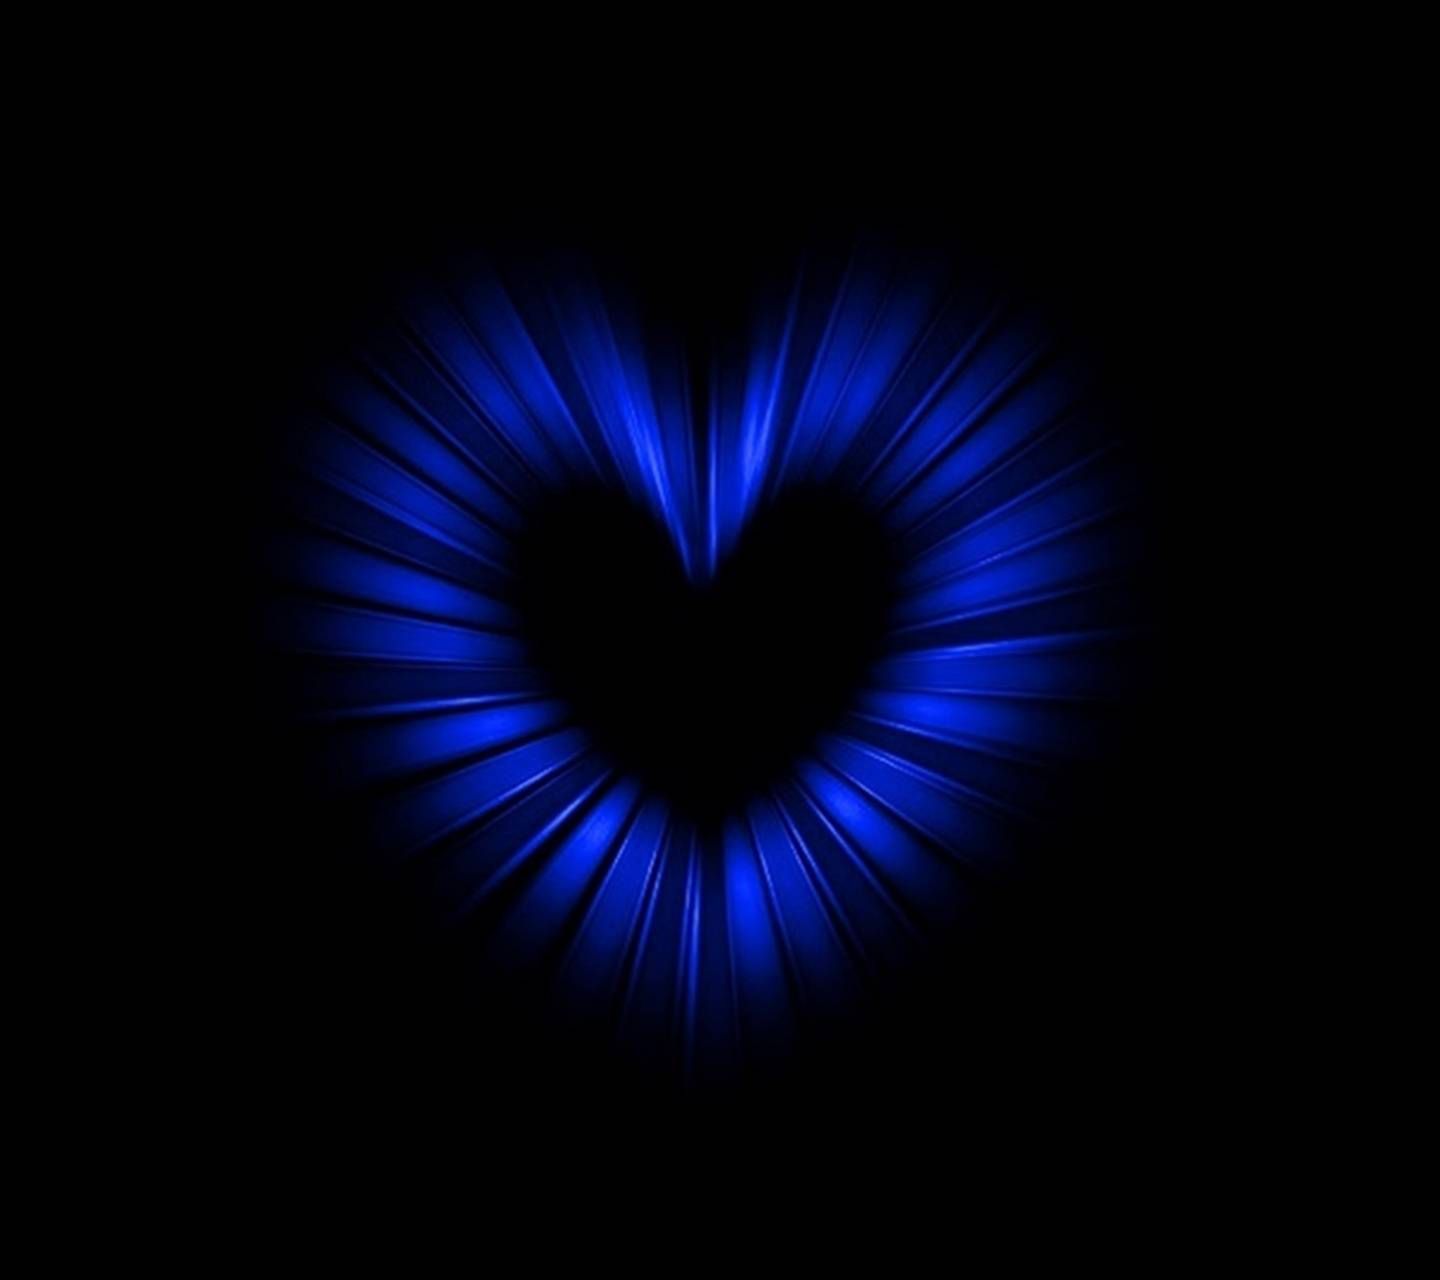 Blue And Black Hearts Wallpapers - Wallpaper Cave